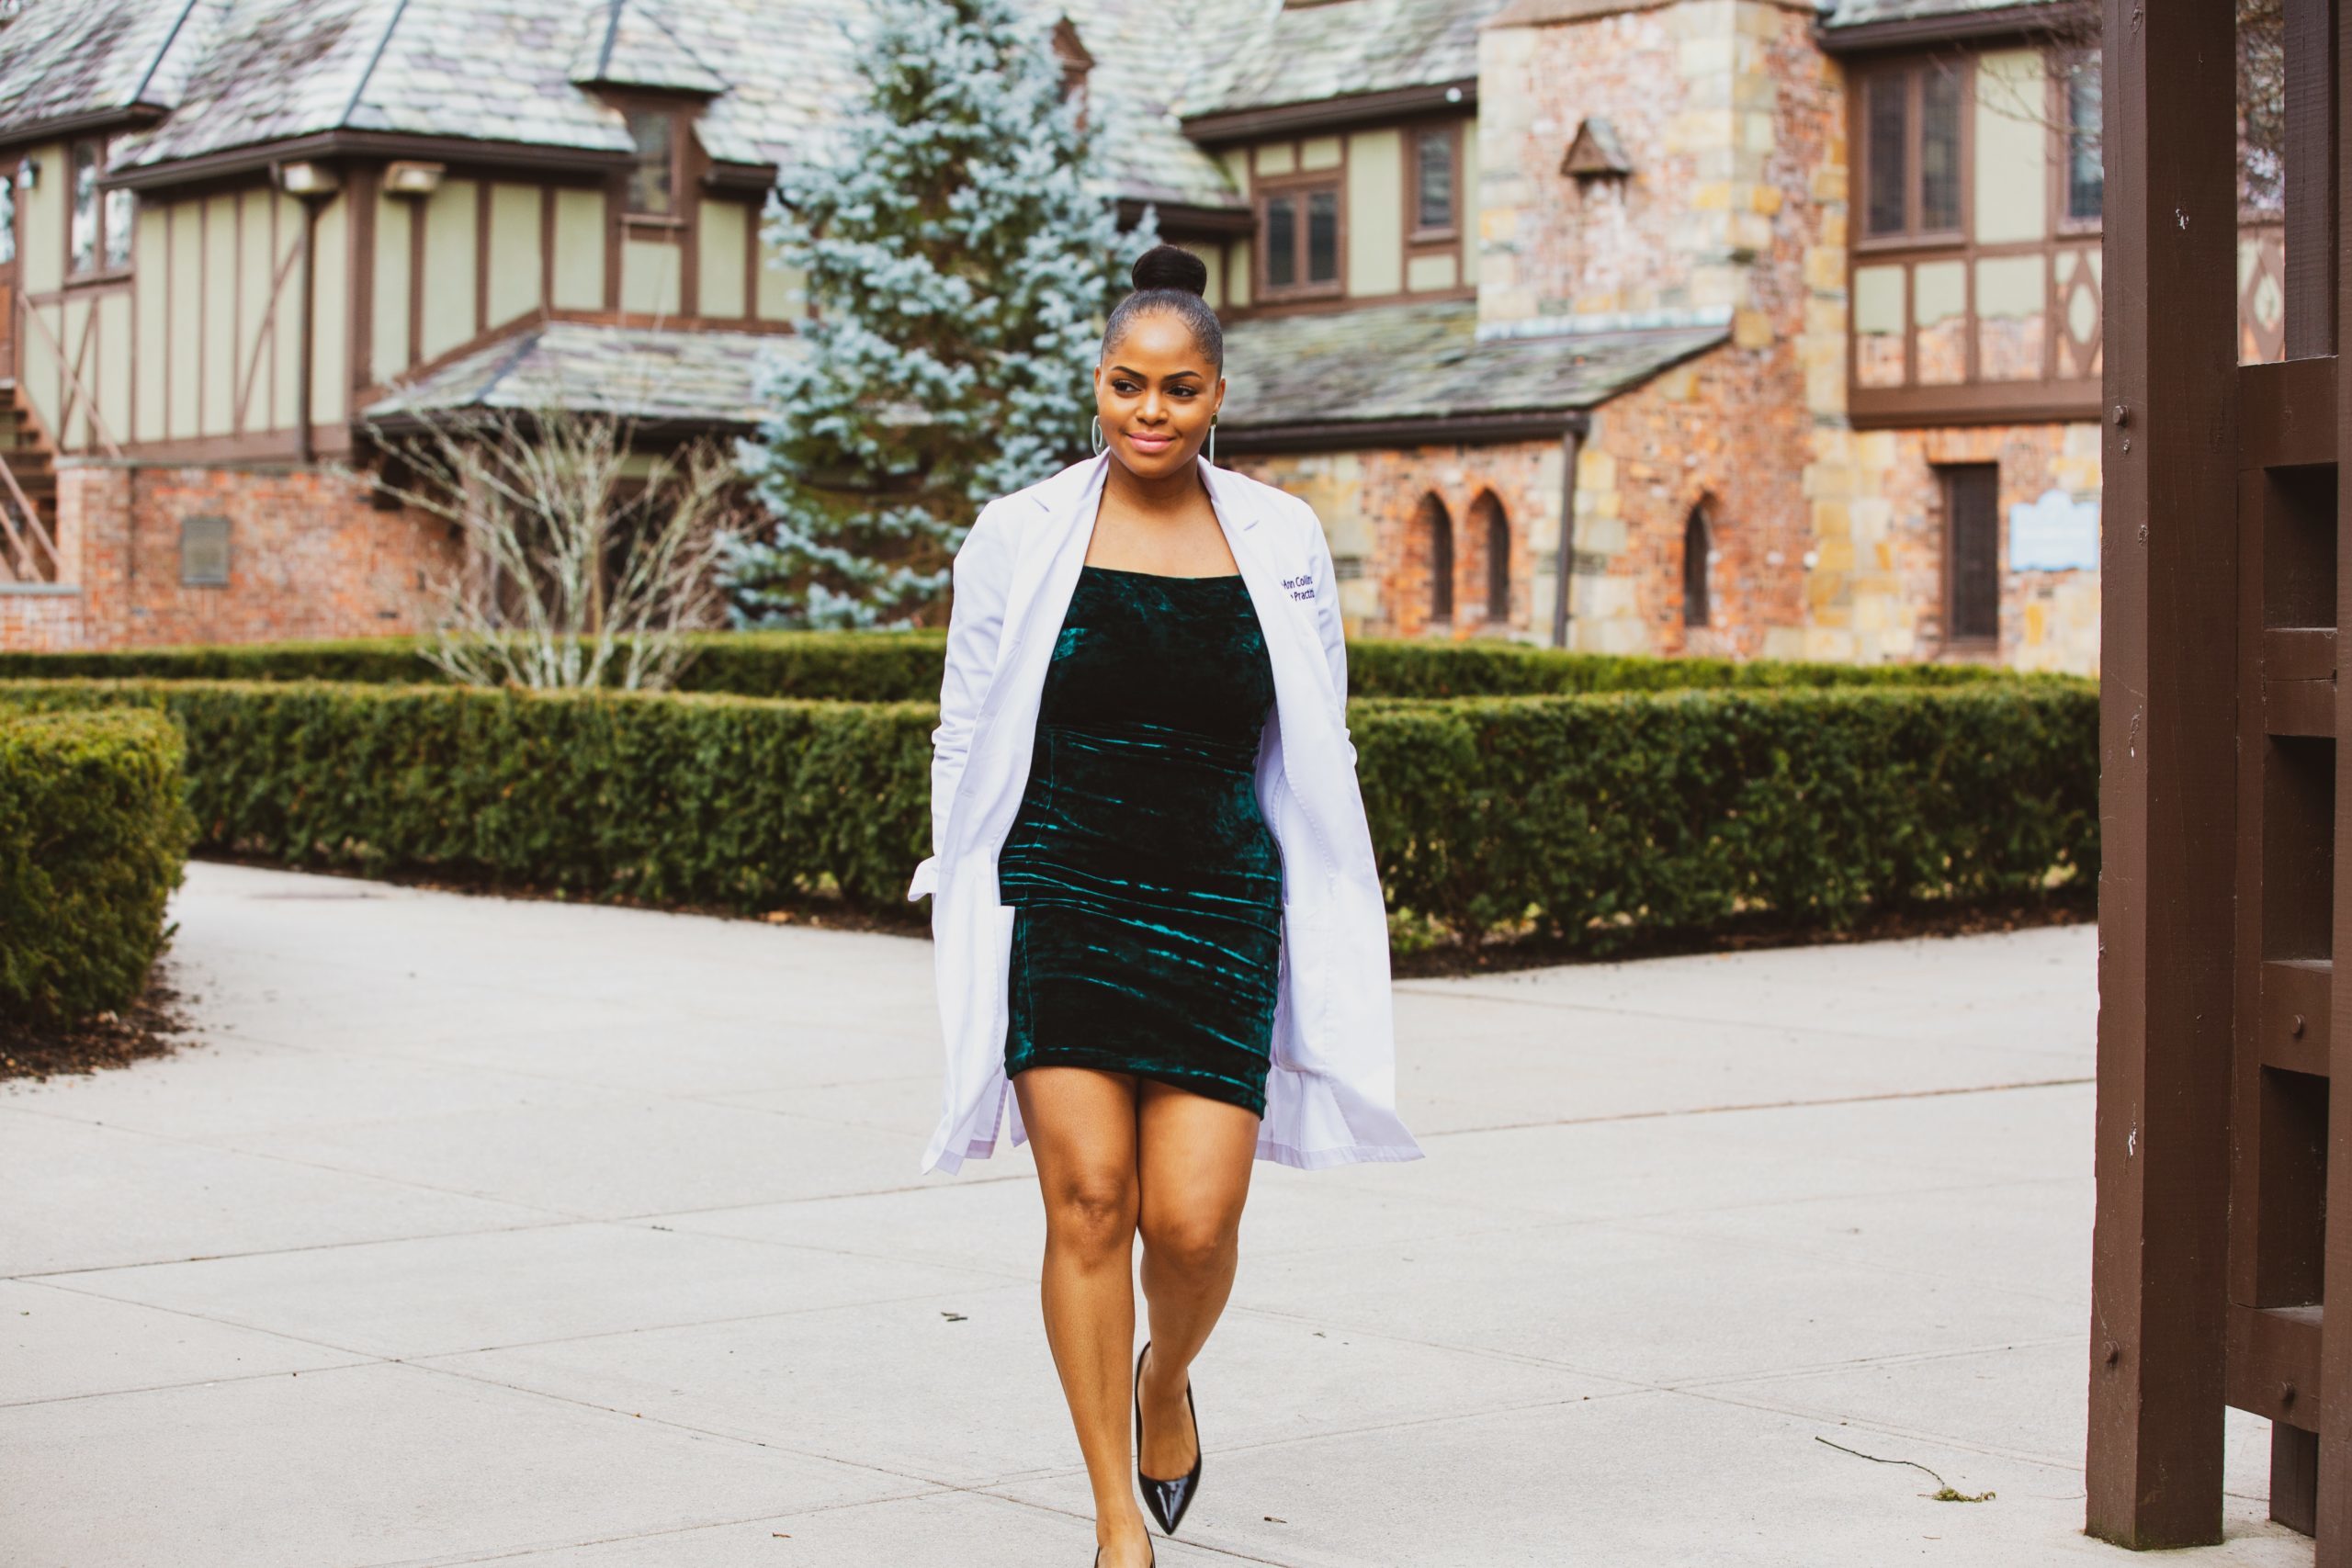 woman-in-green-dress-and-white-coat-walking-on-gray-concrete-3714687